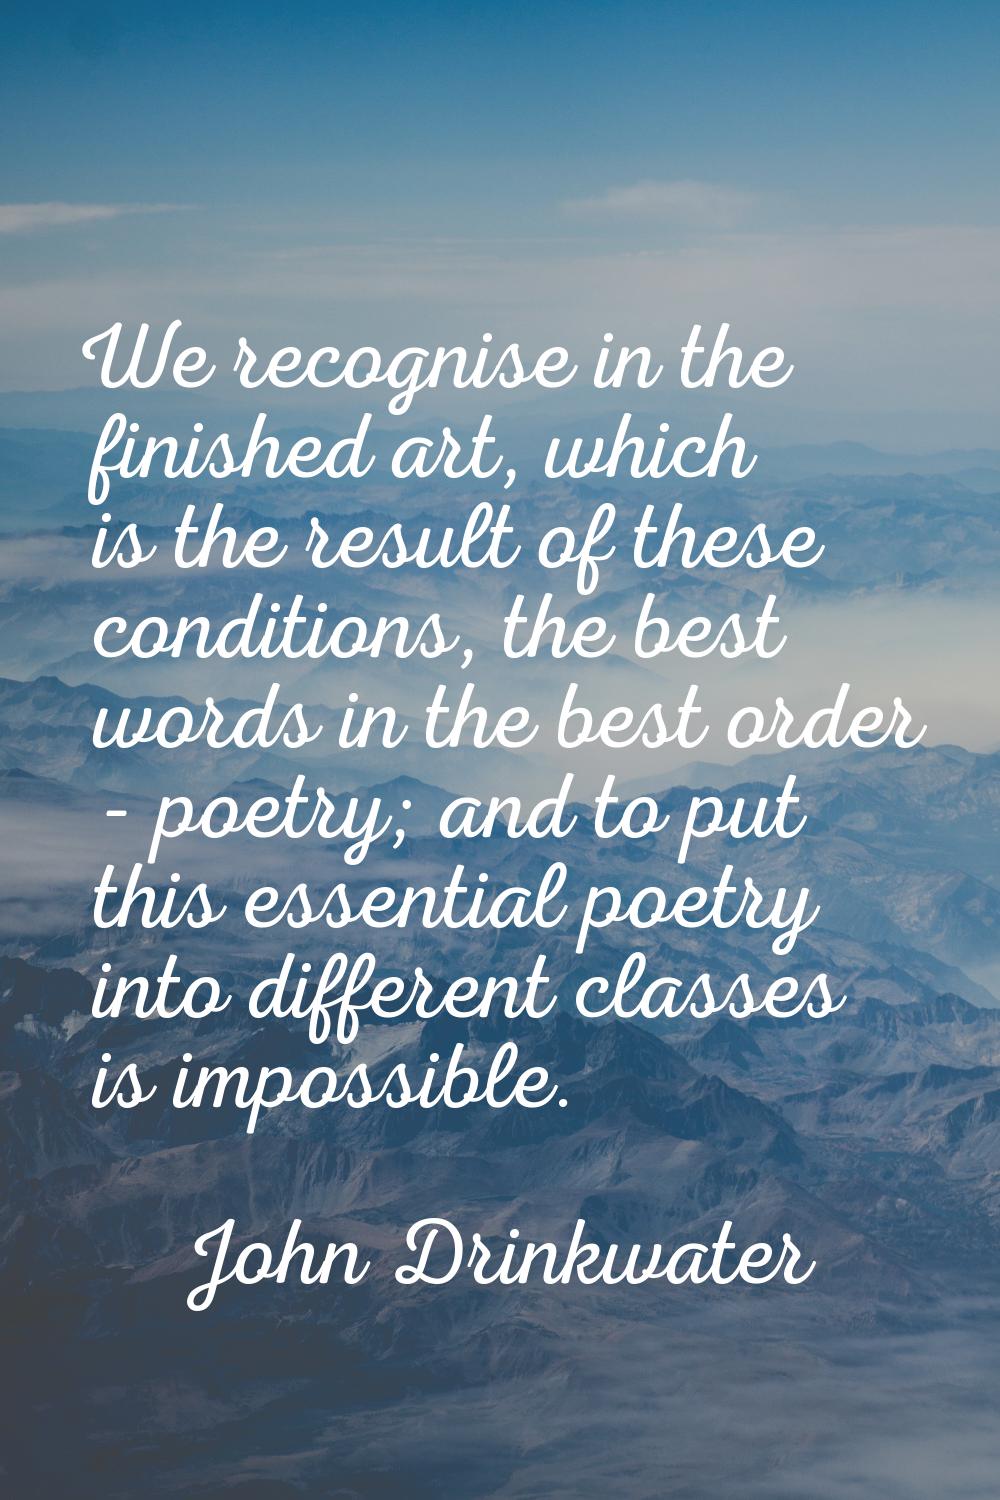 We recognise in the finished art, which is the result of these conditions, the best words in the be